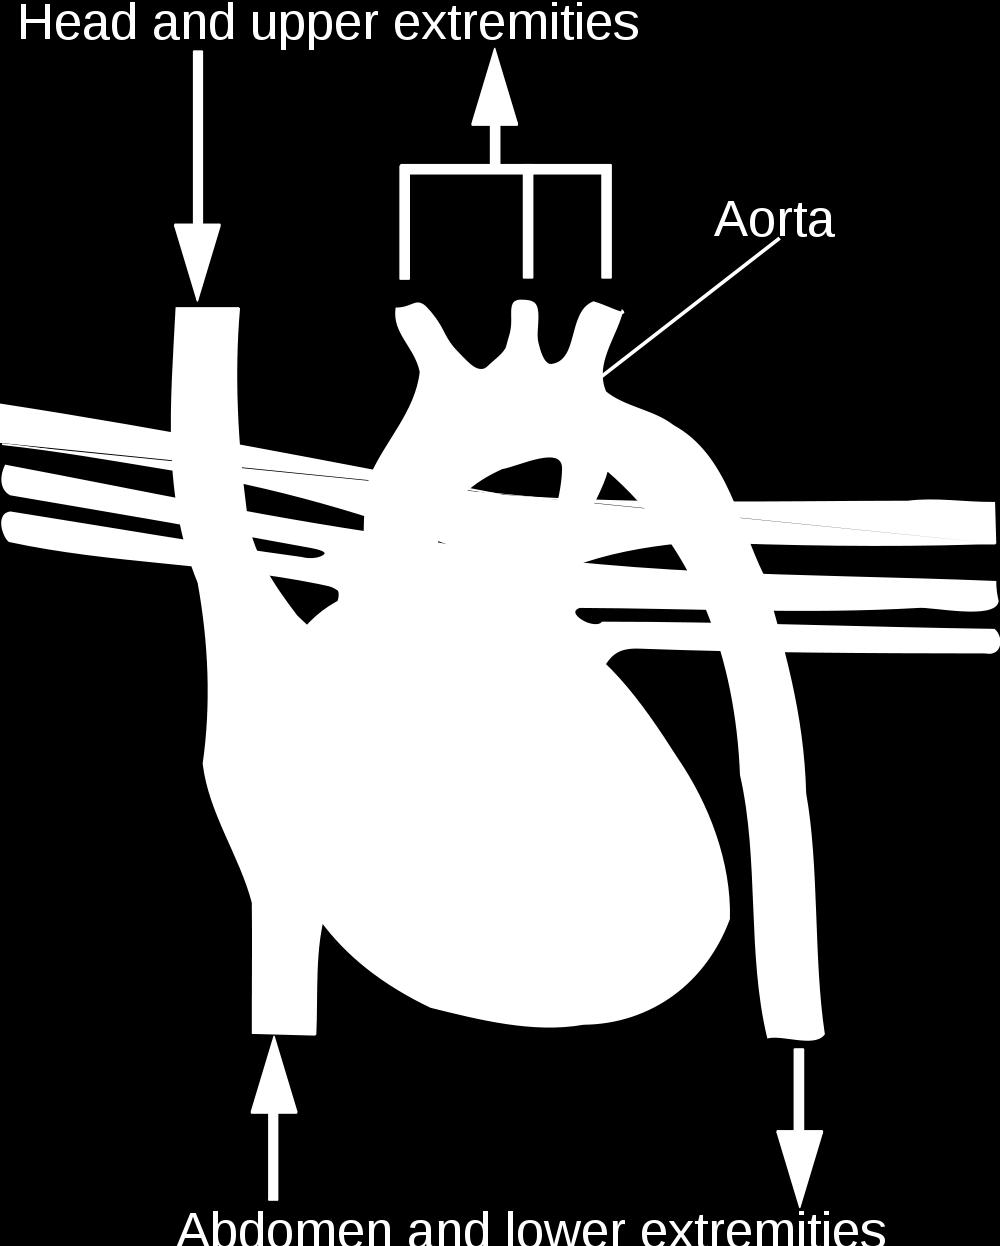 ventricle through the aorta. The aorta and other arteries transport the blood throughout the body, where it gives up oxygen and picks up carbon dioxide.